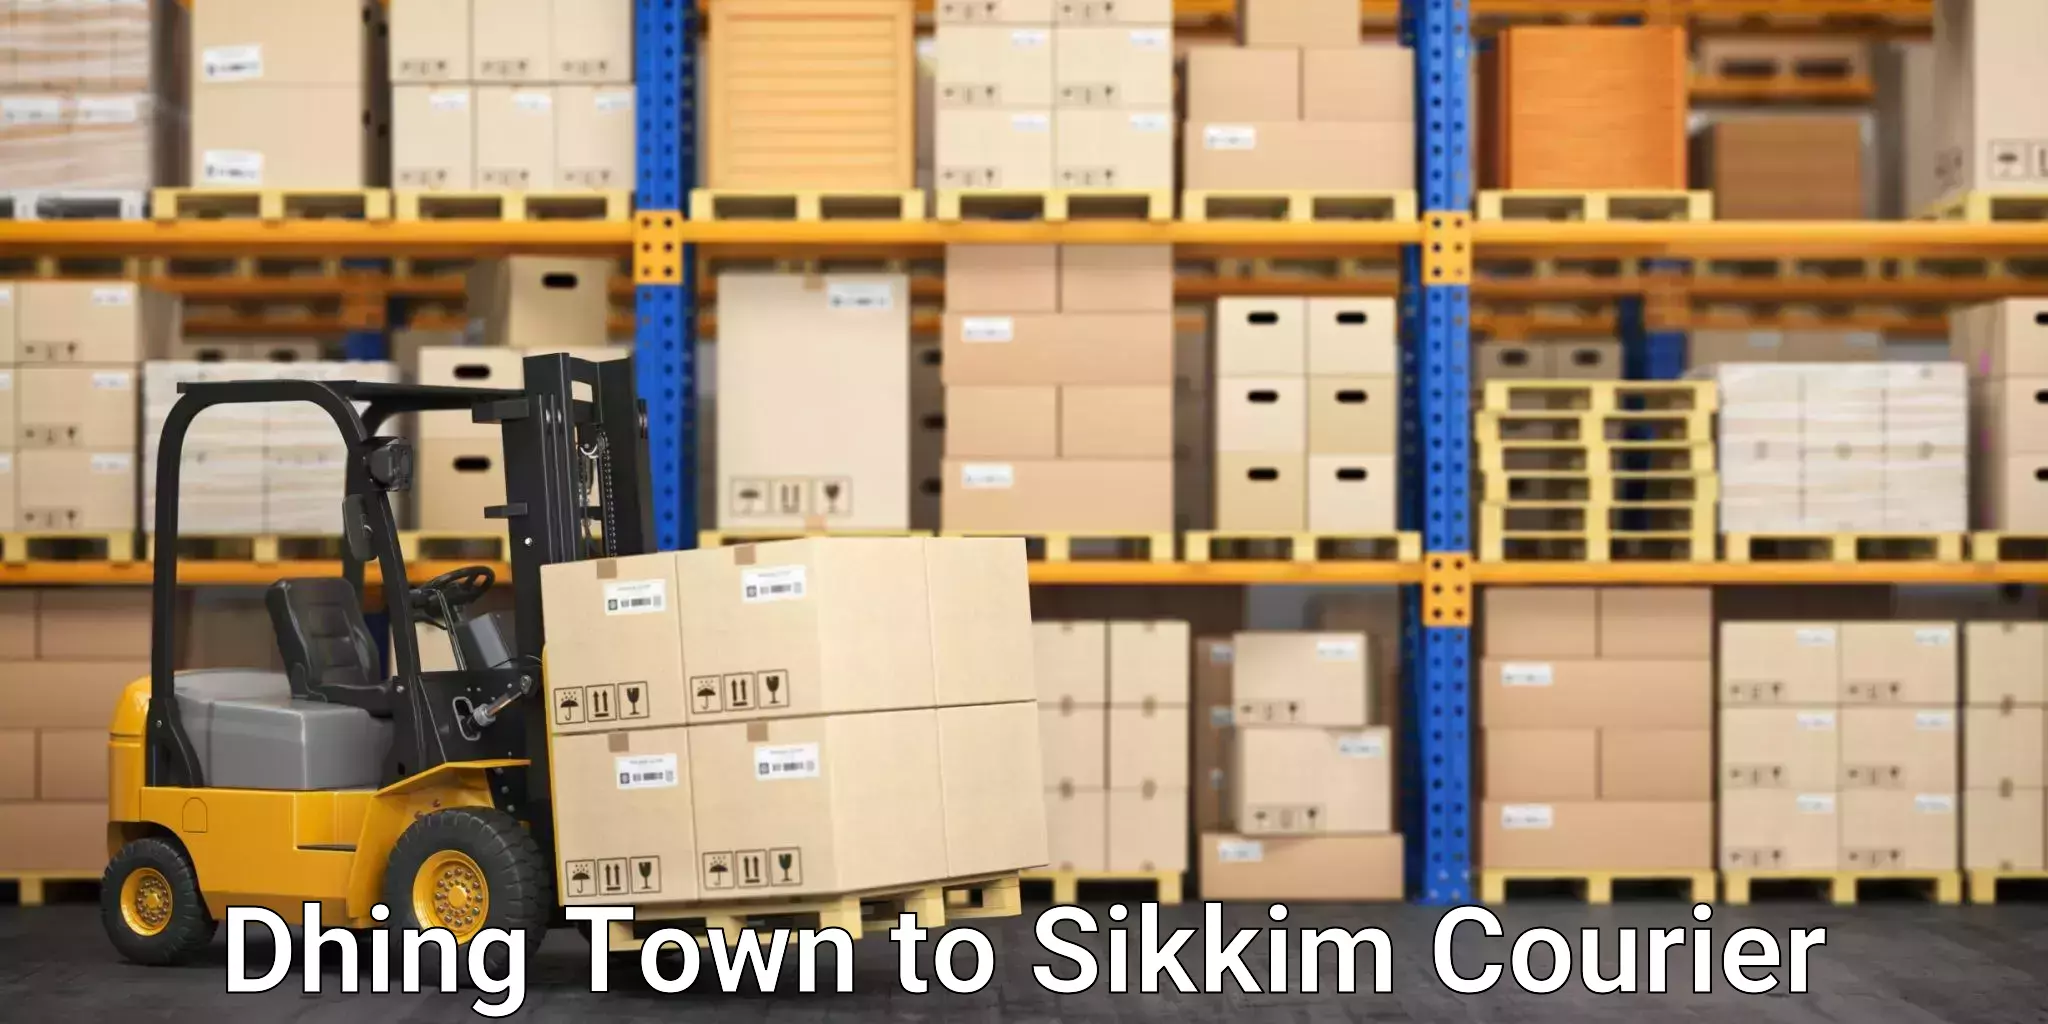 High-performance logistics Dhing Town to East Sikkim